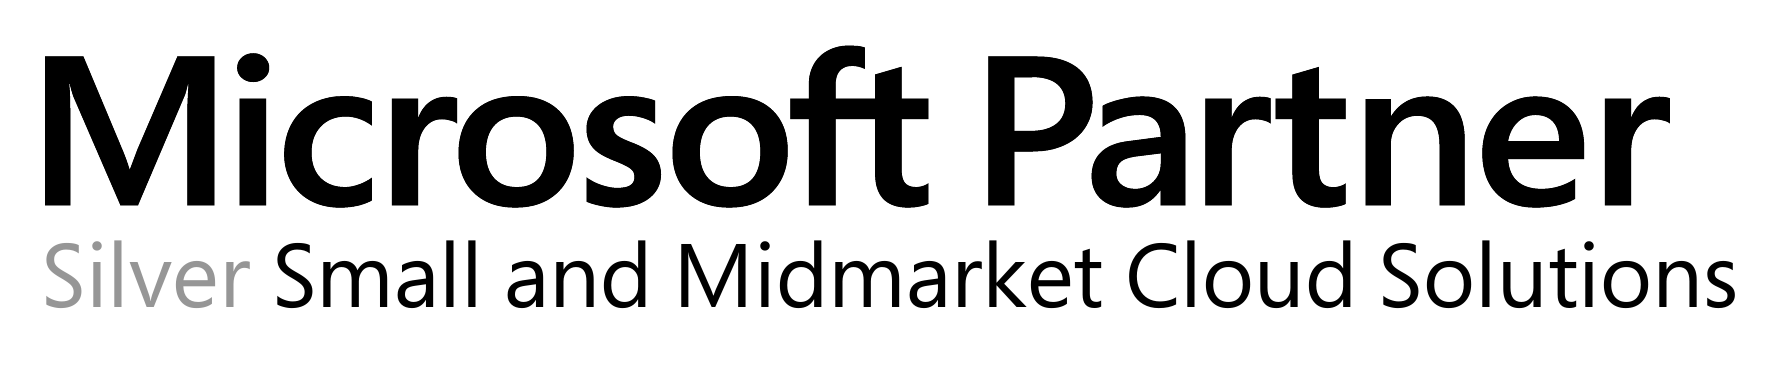 Microsoft Partner - Silver Small and Midmarket Cloud Solutions Competency